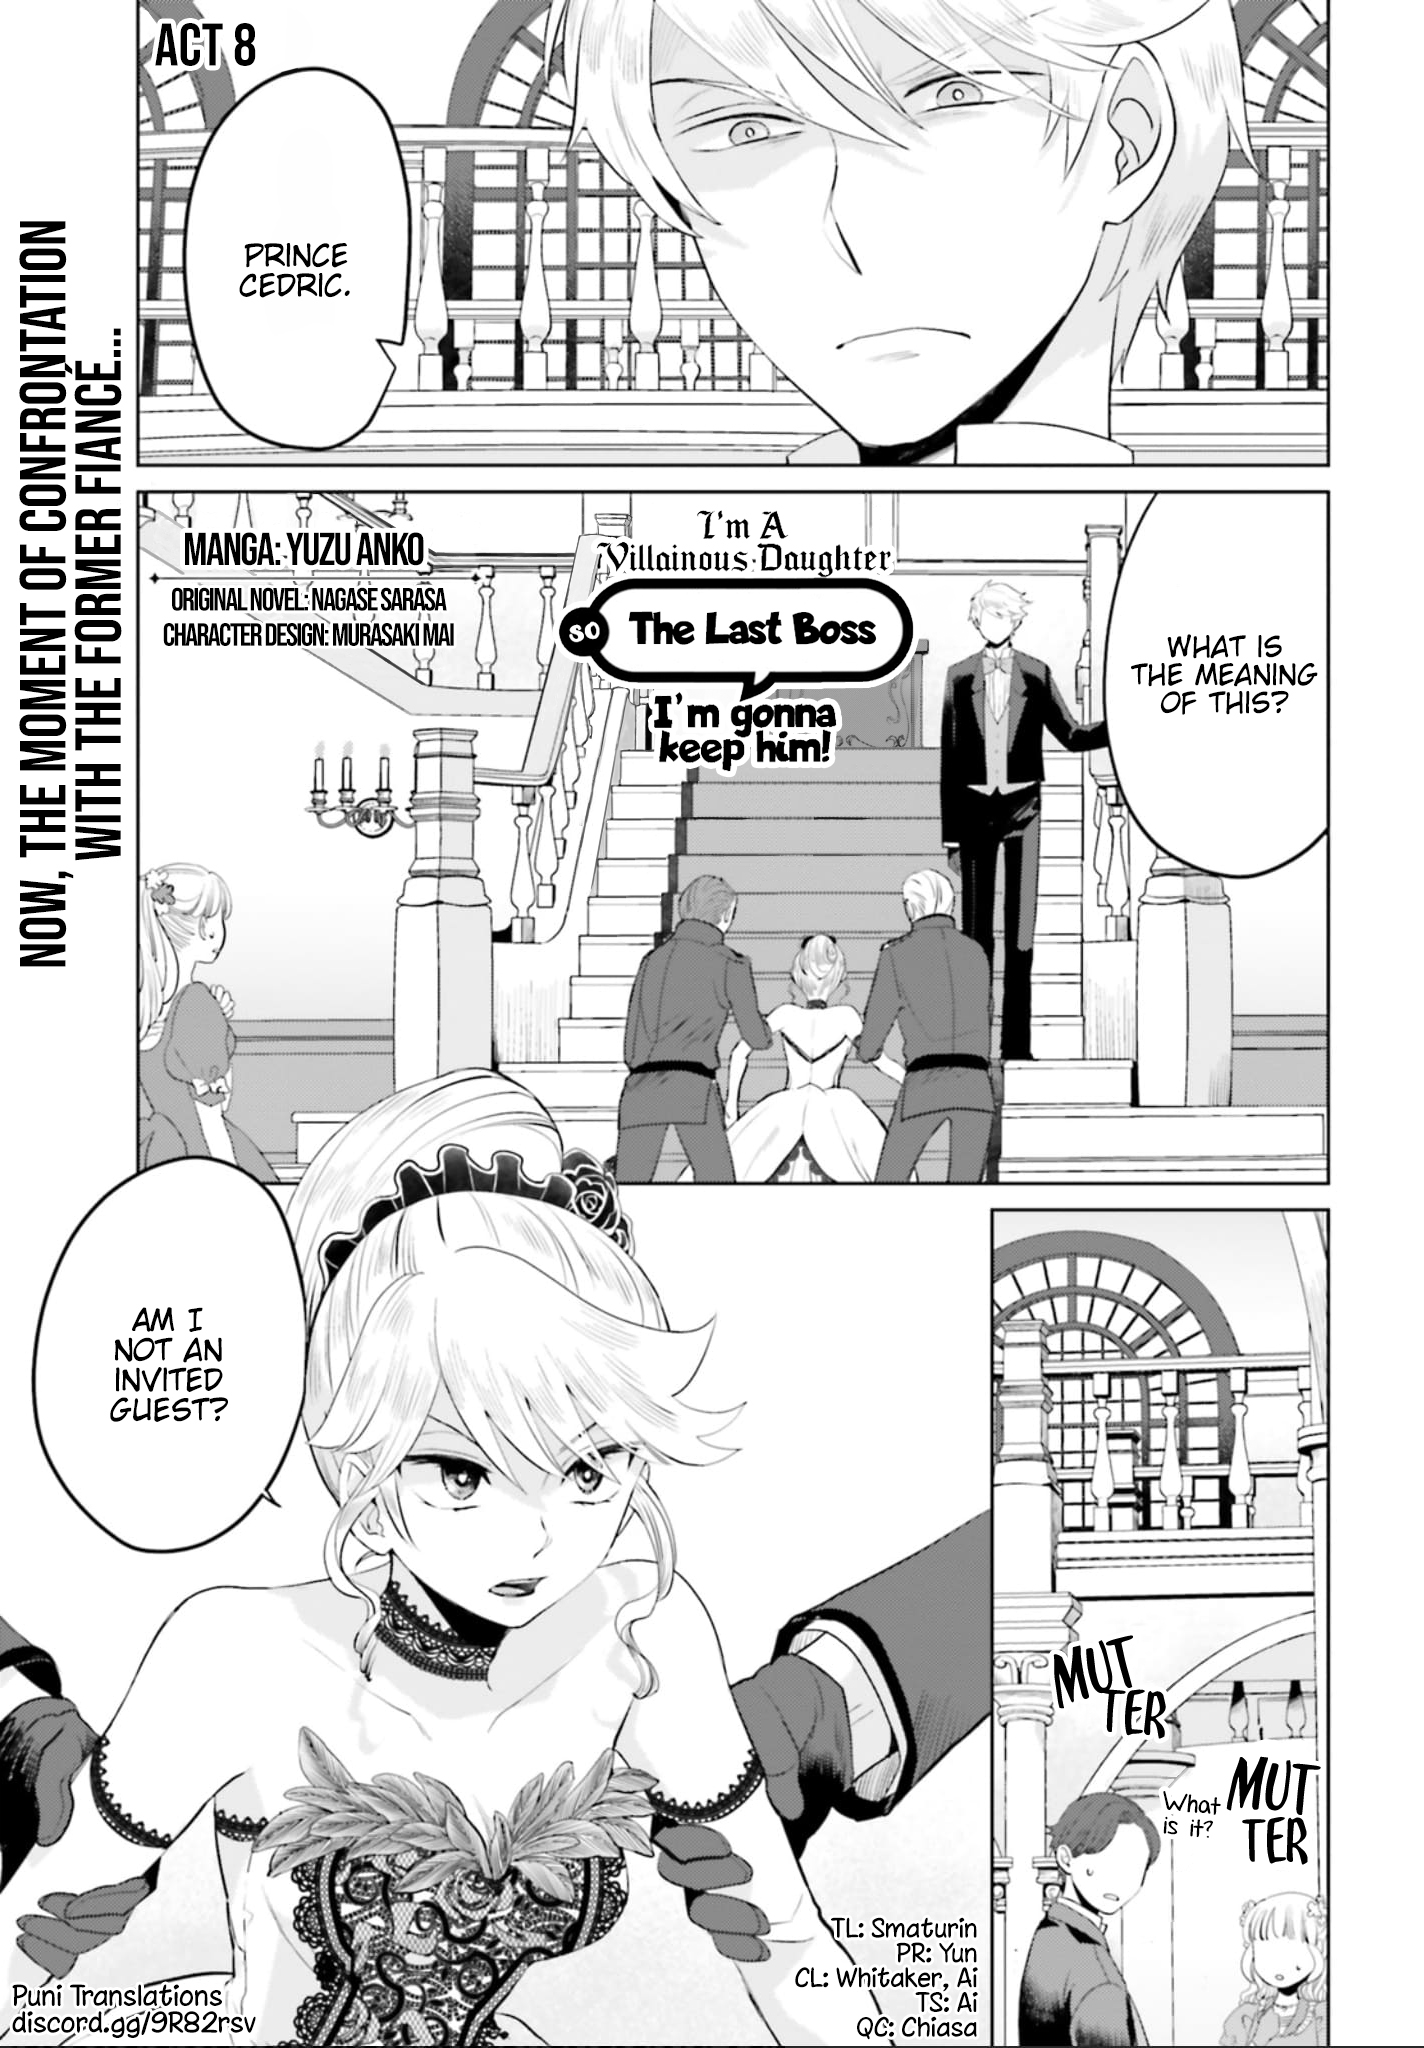 I’M A Villainous Daughter, So I’M Going To Keep The Last Boss Vol.2 Chapter 8 - Picture 1